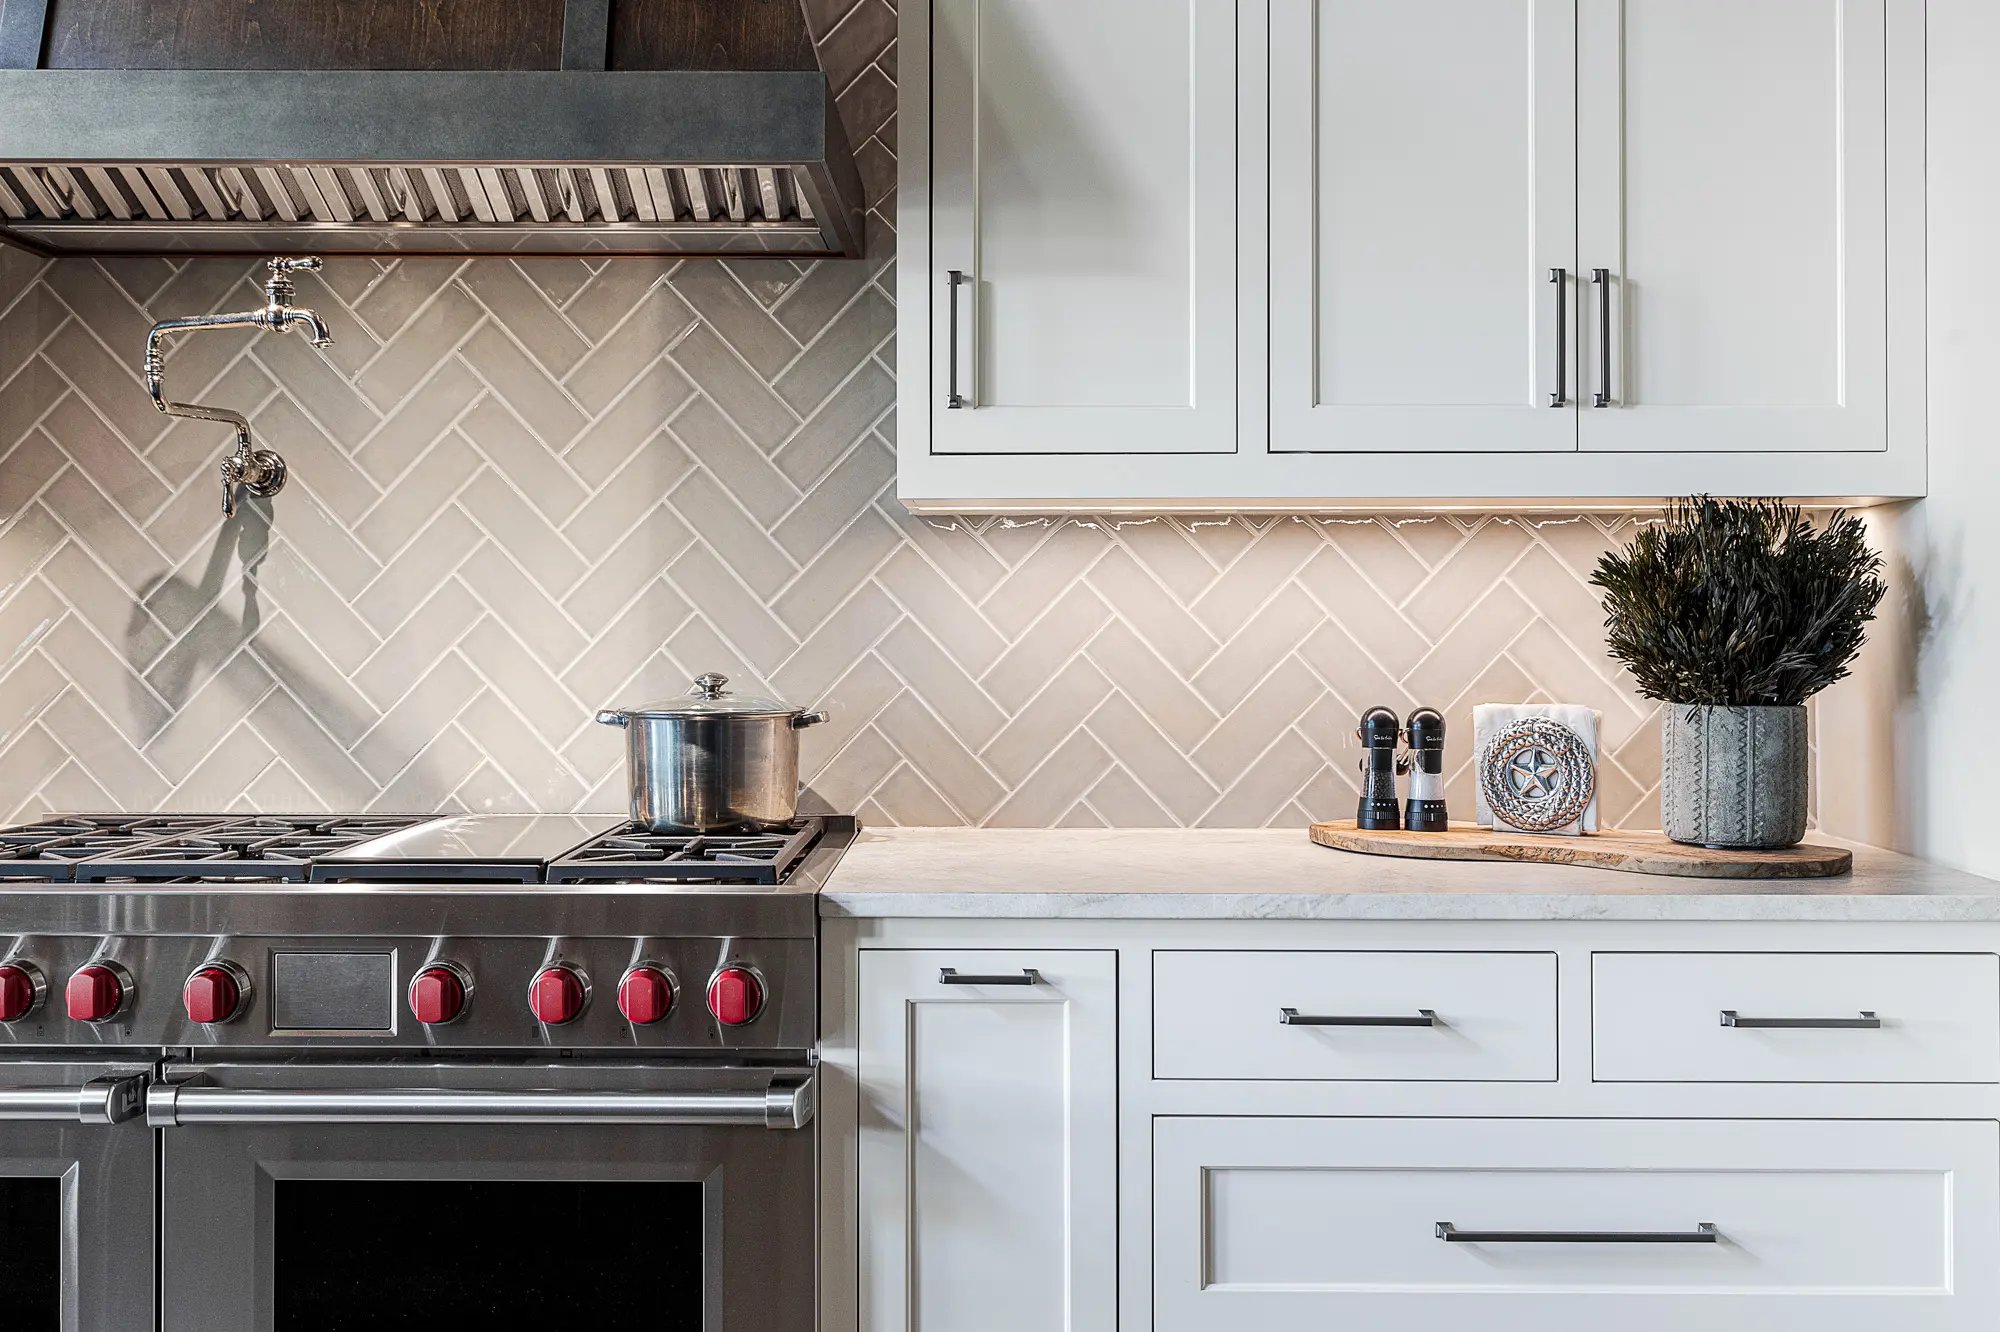 Elegant gas stove top with red knobs, stainless pot, and decorative kitchen items against a herringbone tile backsplash.